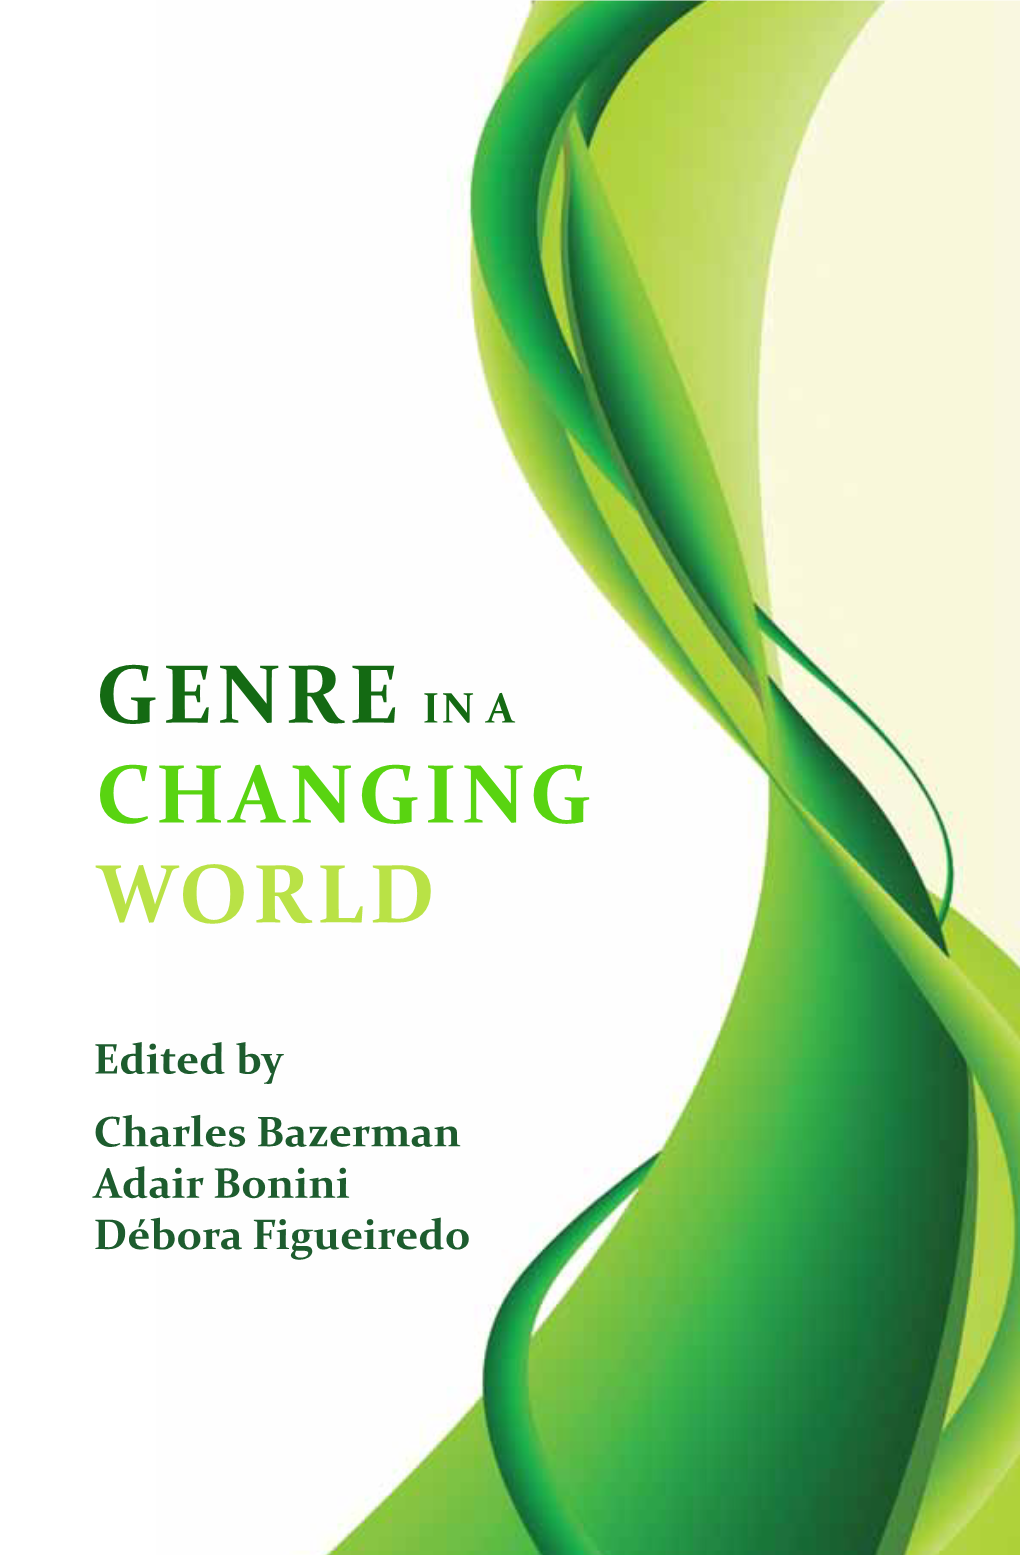 Genre in a Changing World Provides a Wide-Ranging Sampler of the Remarkable Variety of Current Work